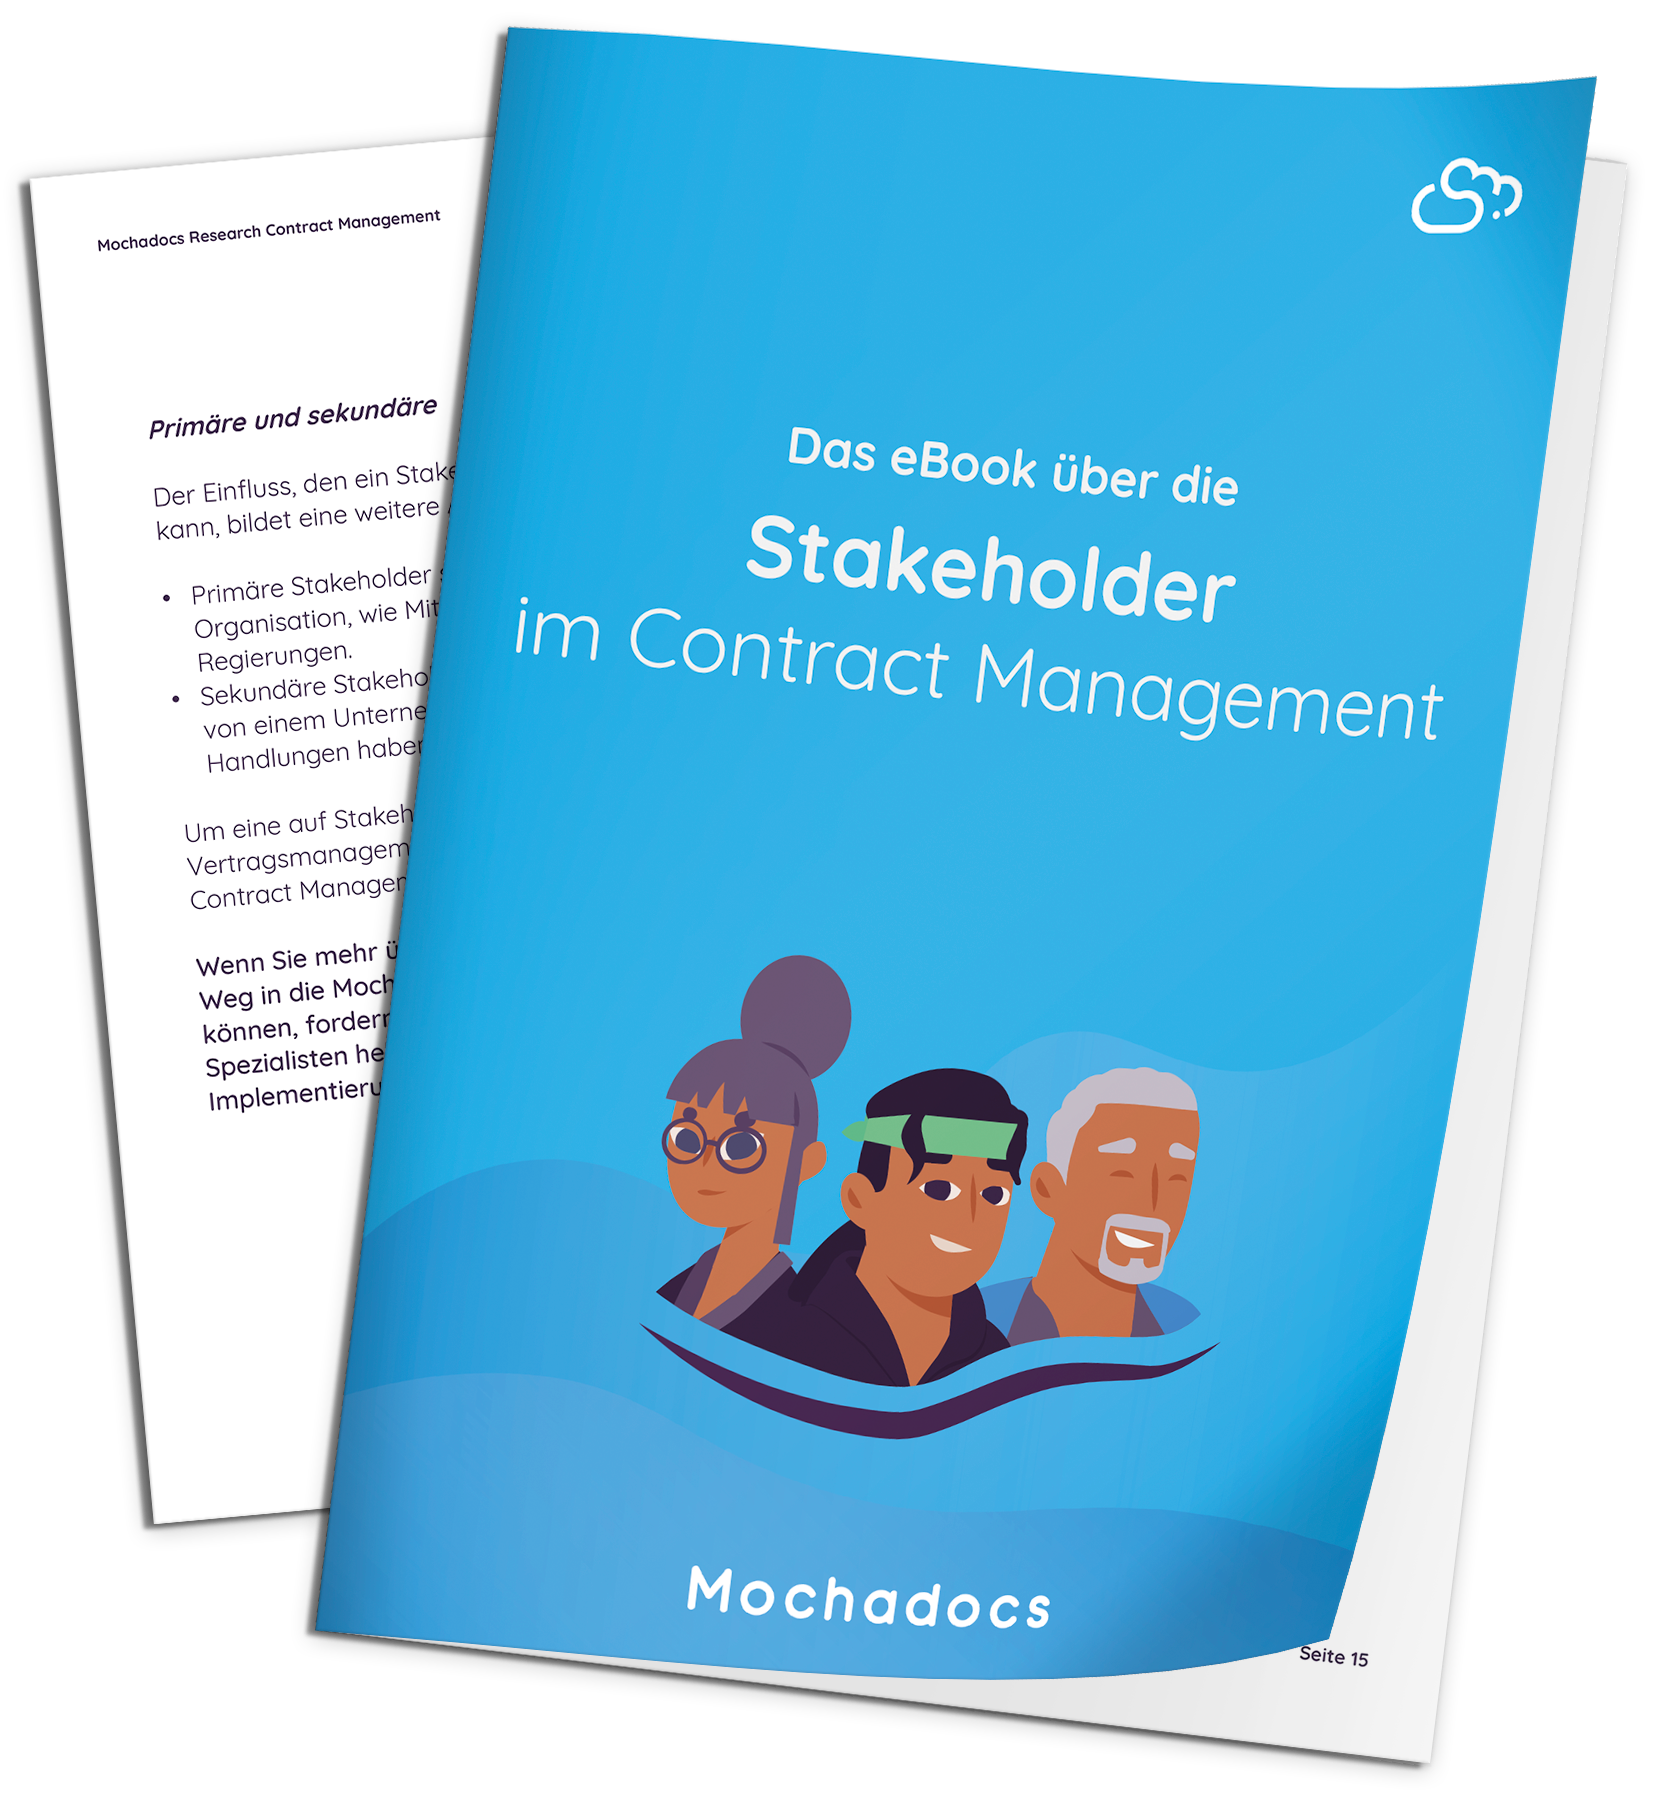 Mochadocs - Contract Management - eBook - Stakeholder im Contract Management